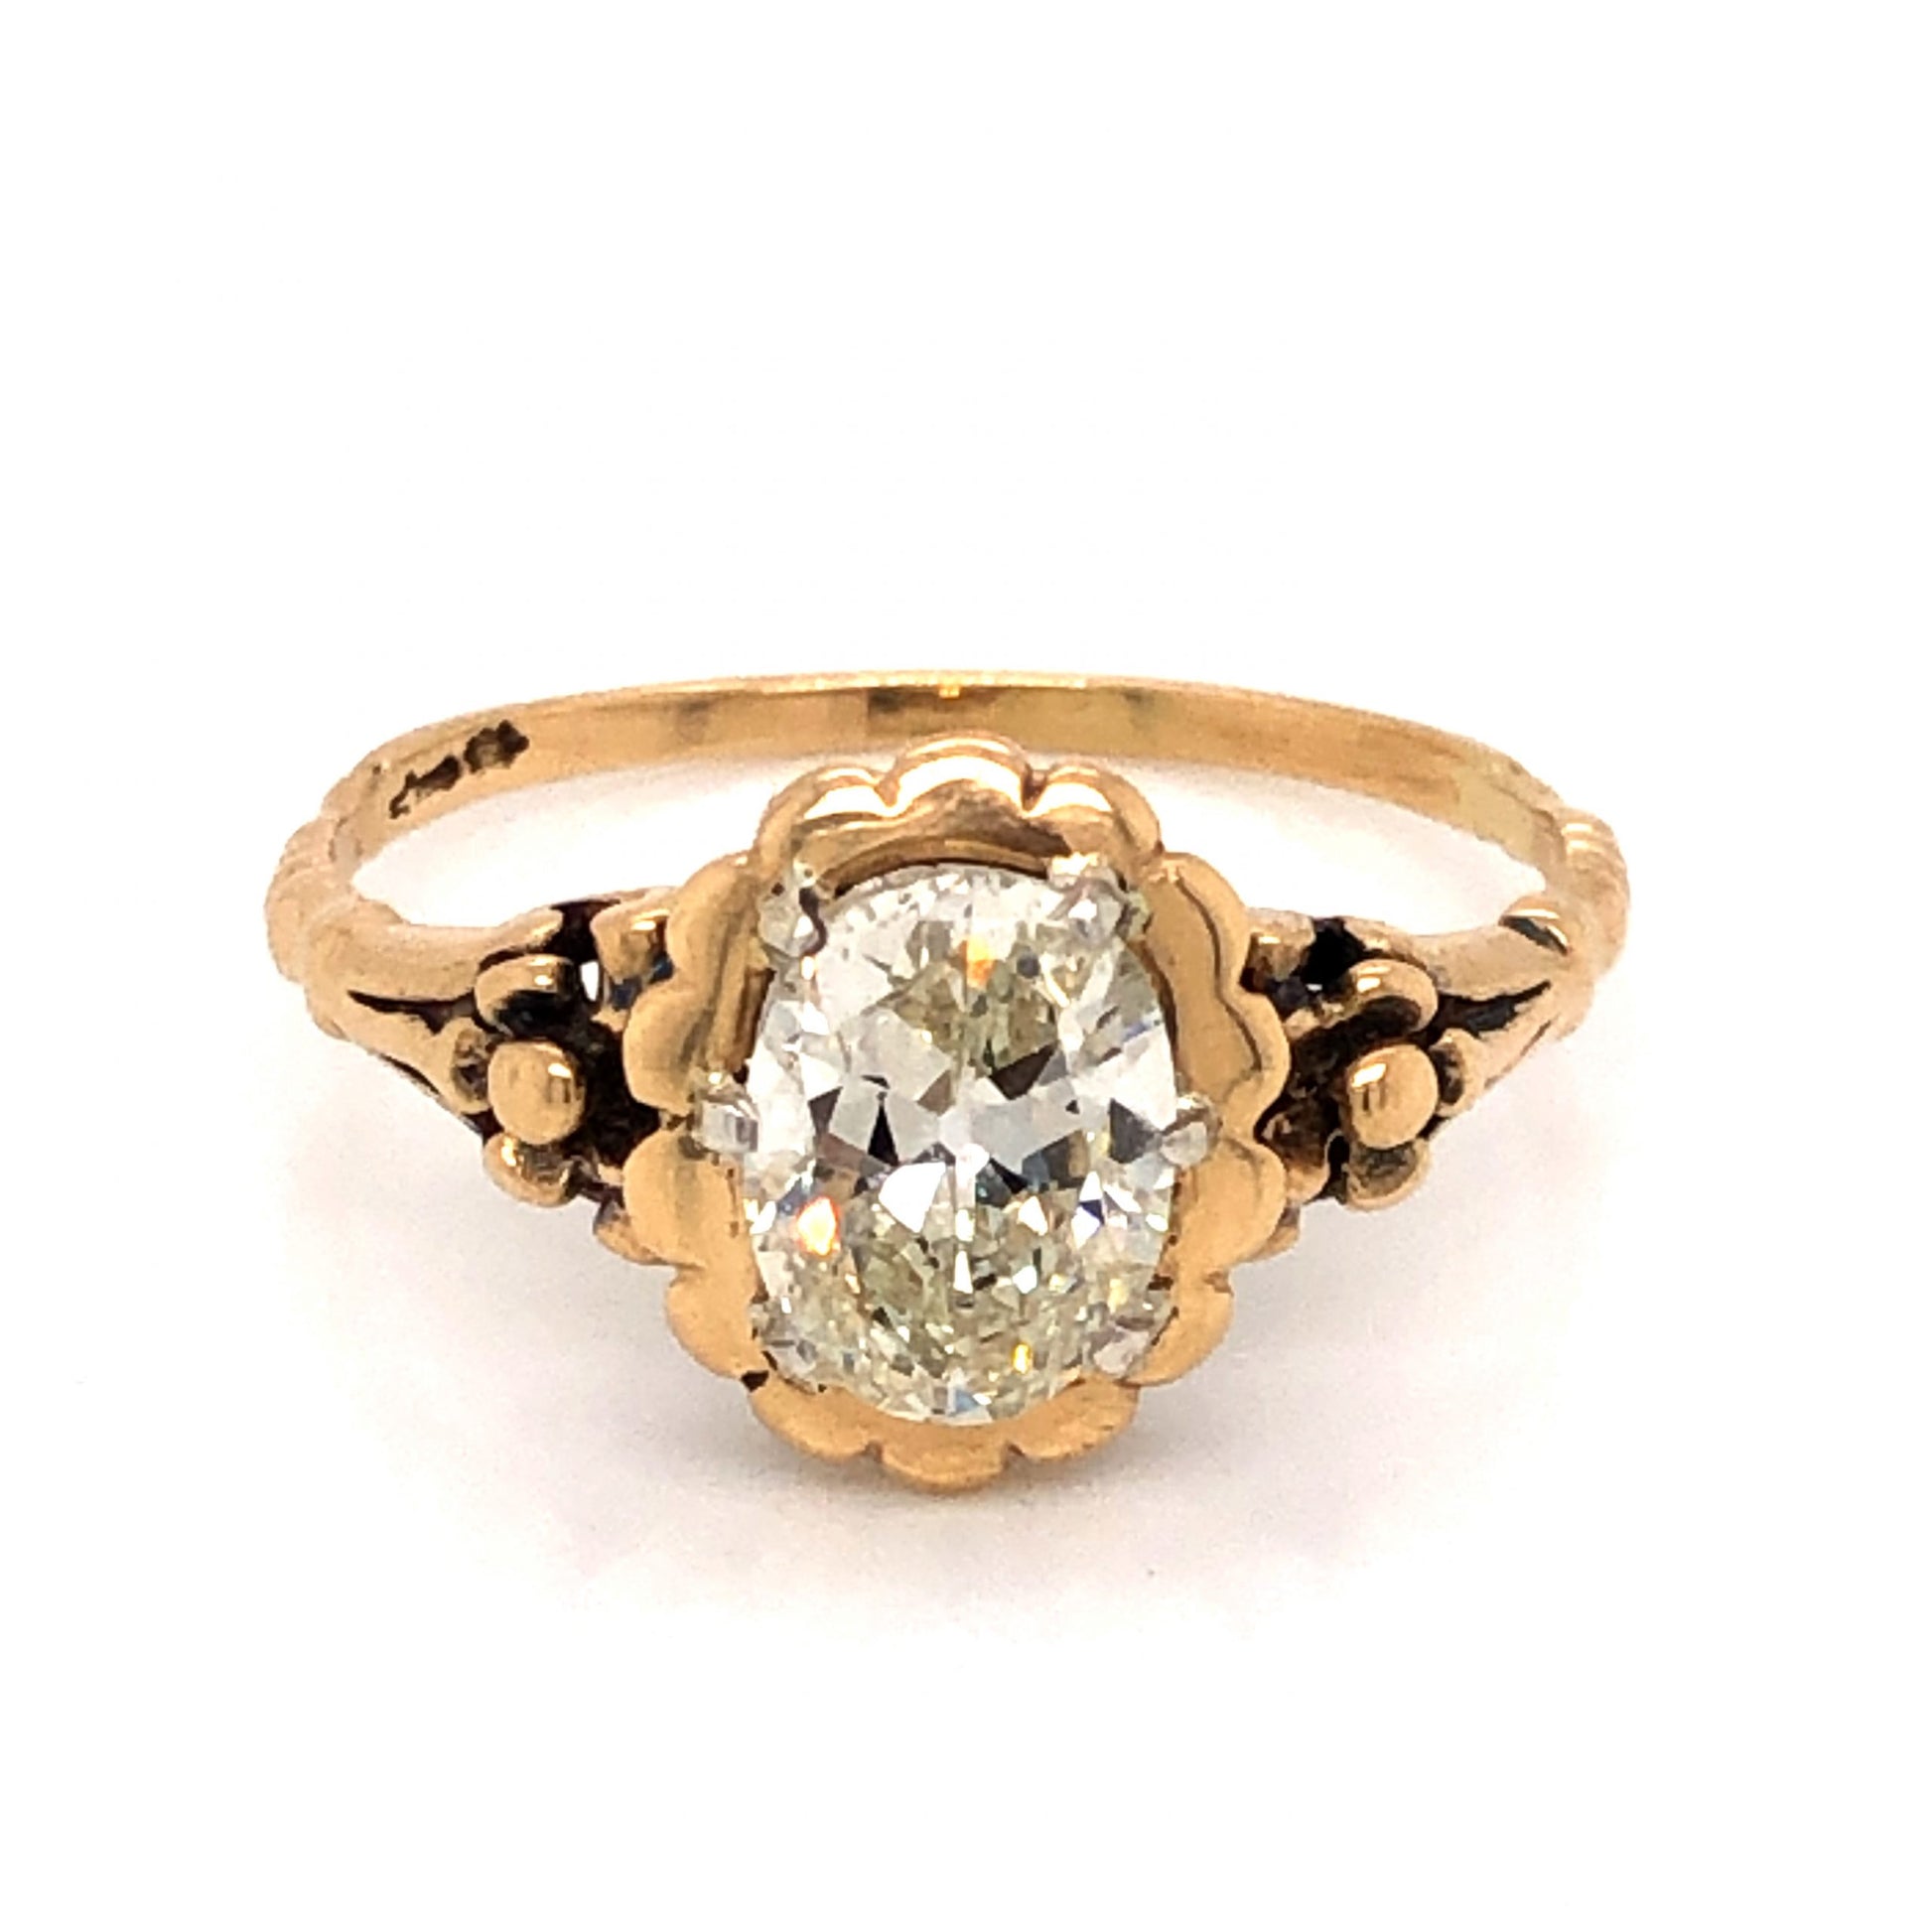 1.08 Victorian Oval Cut Diamond Engagement Ring in 14k Yellow GoldComposition: Platinum Ring Size: 7 Total Diamond Weight: 1.08ct Total Gram Weight: 2.3 g Inscription: 585, 925, LM
      